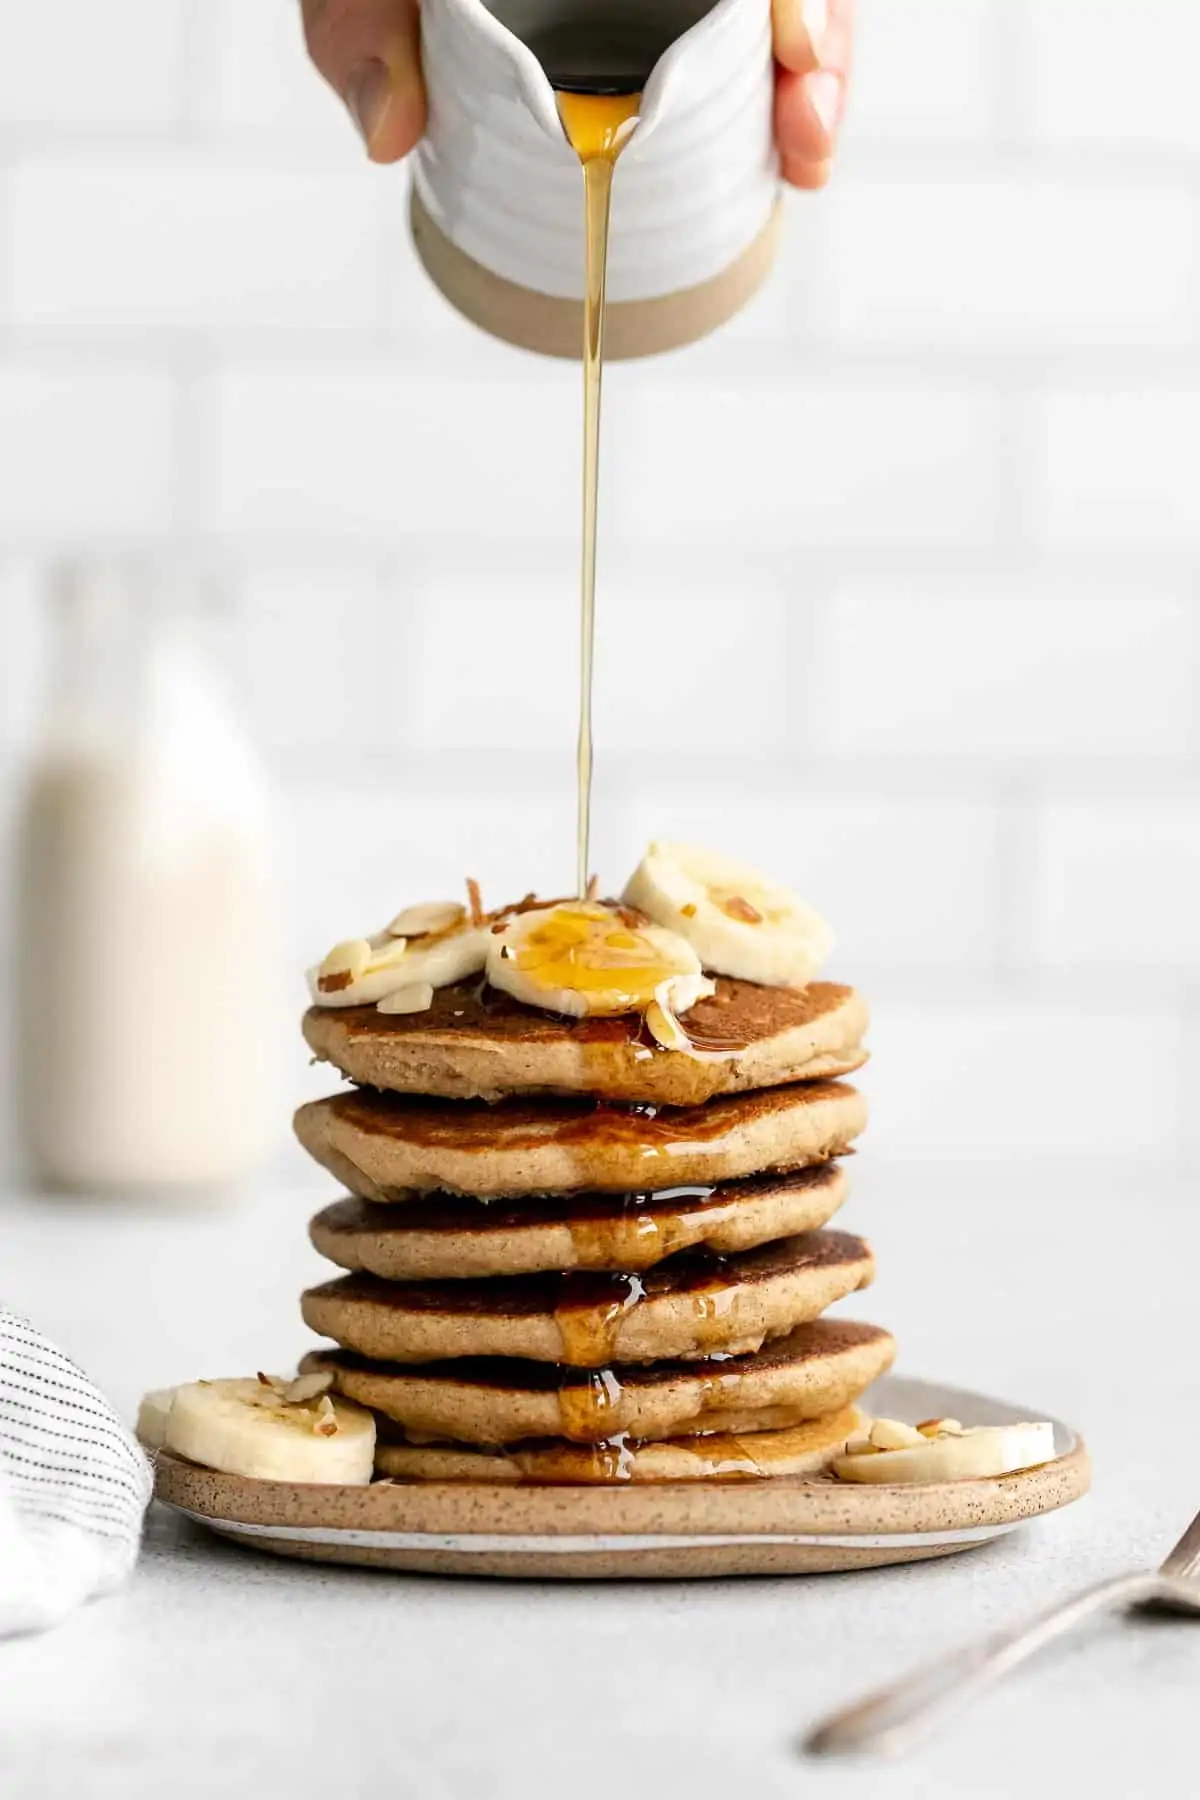 pouring maple syrup over the gluten free banana pancakes